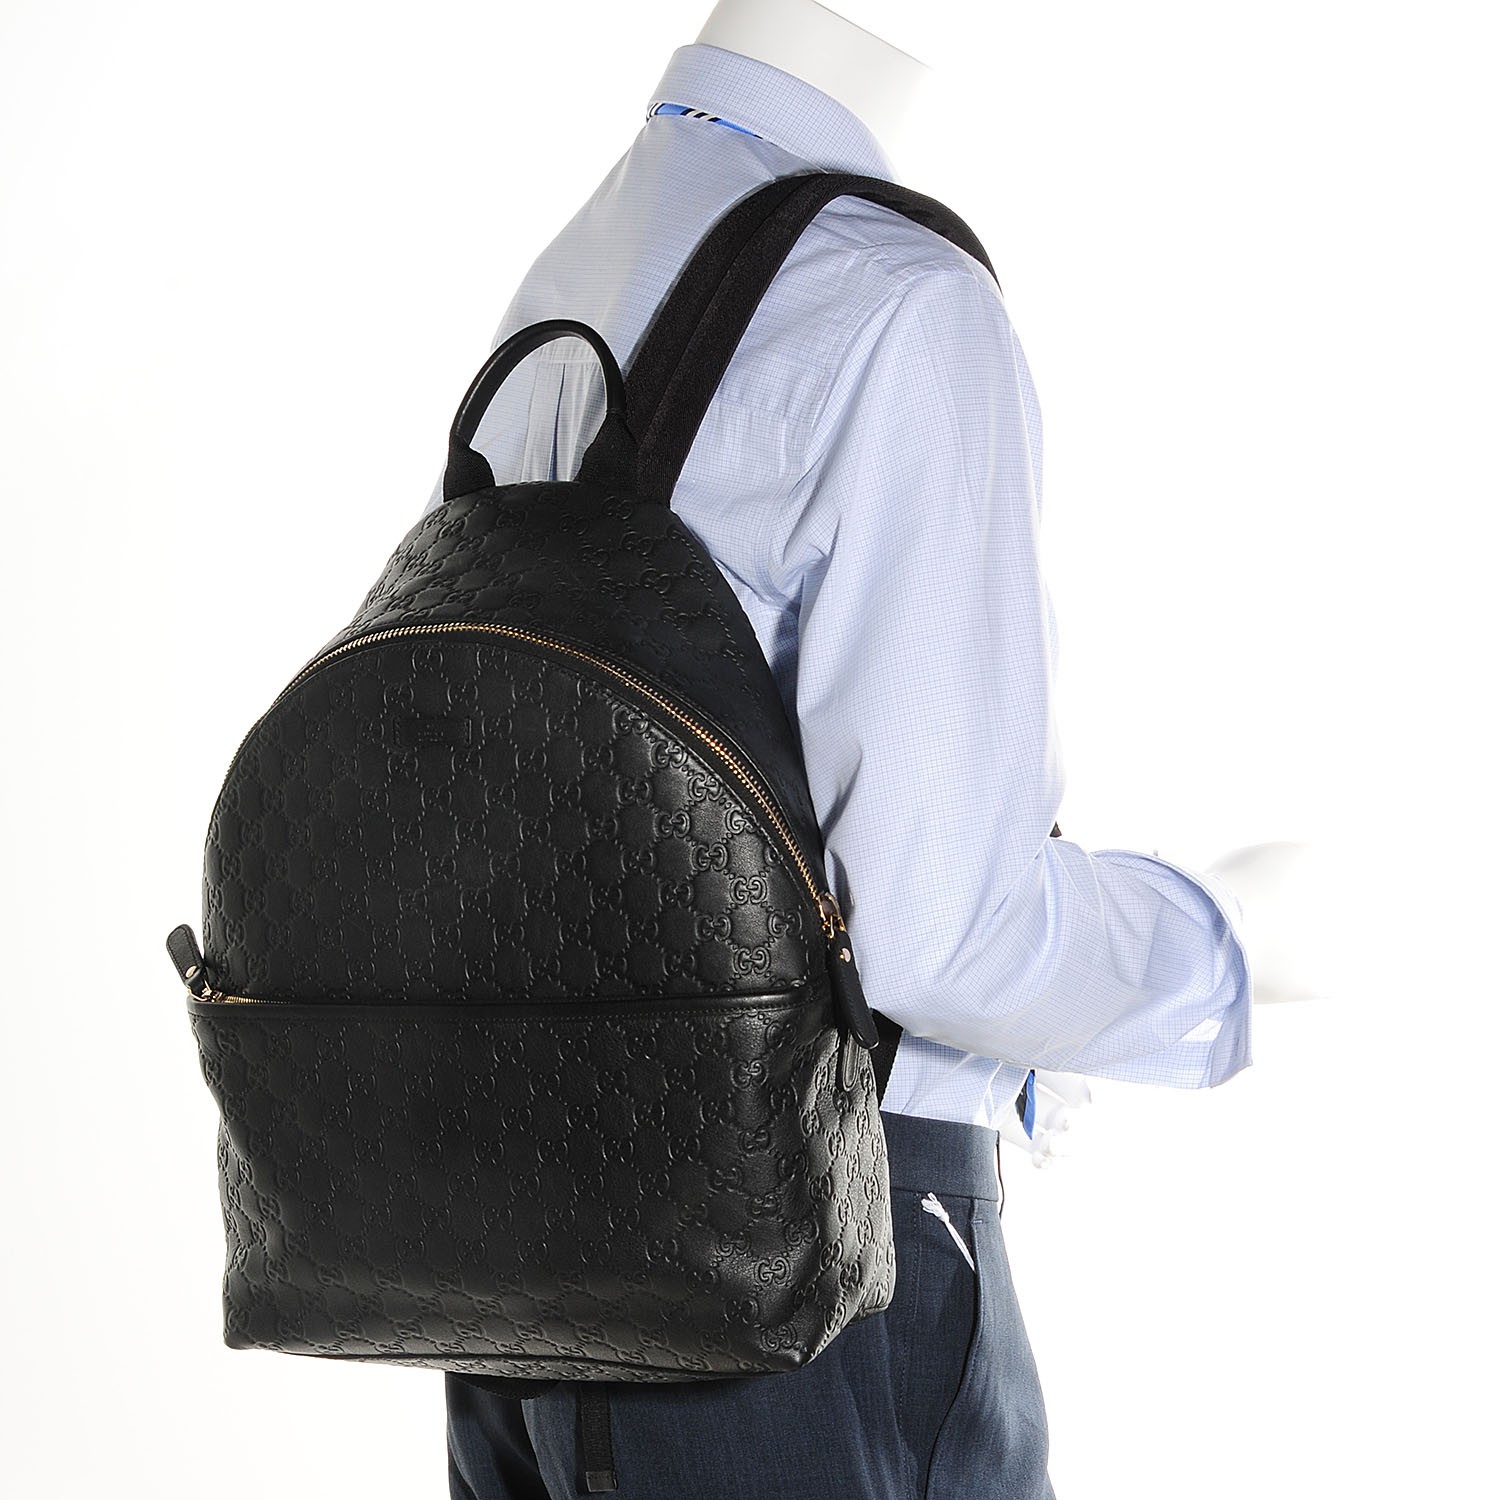 guccissima backpack, OFF 73%,www 